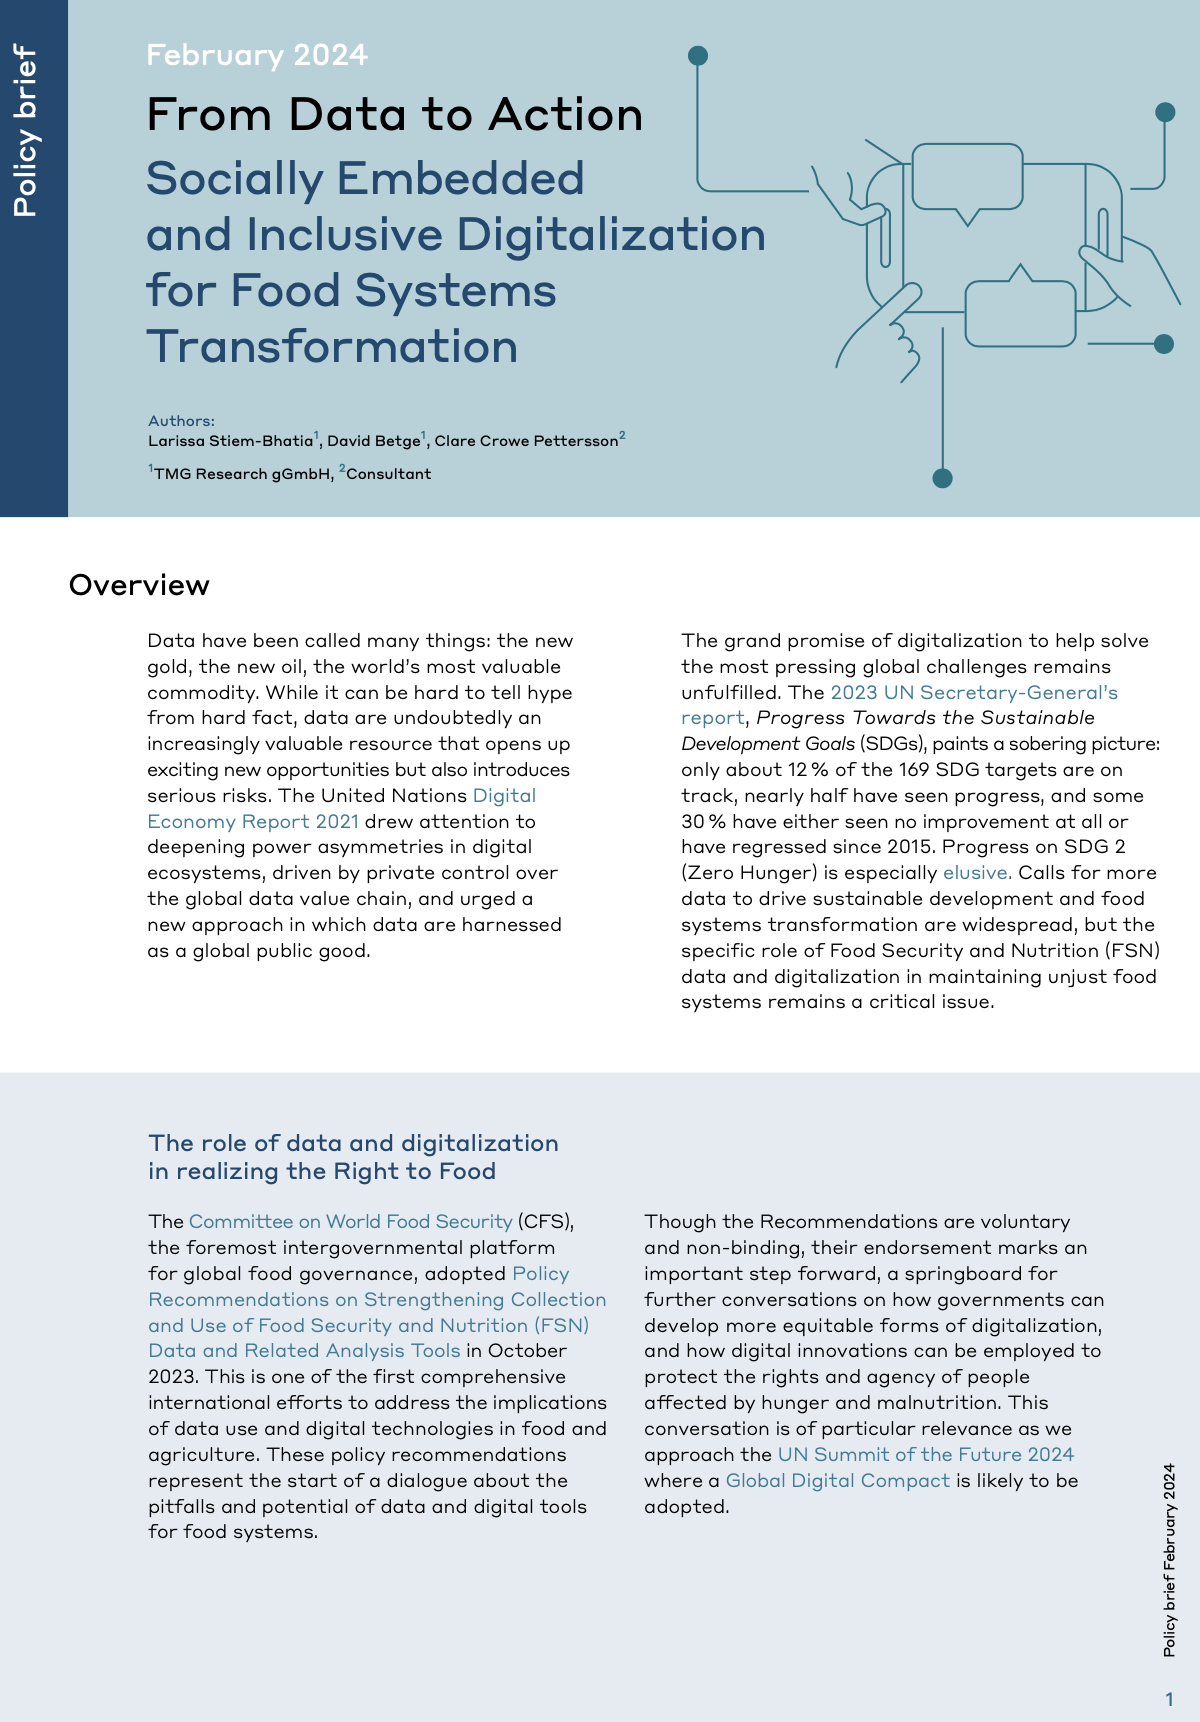 From Data to Action: Socially Embedded and Inclusive Digitalization for Food Systems Transformation